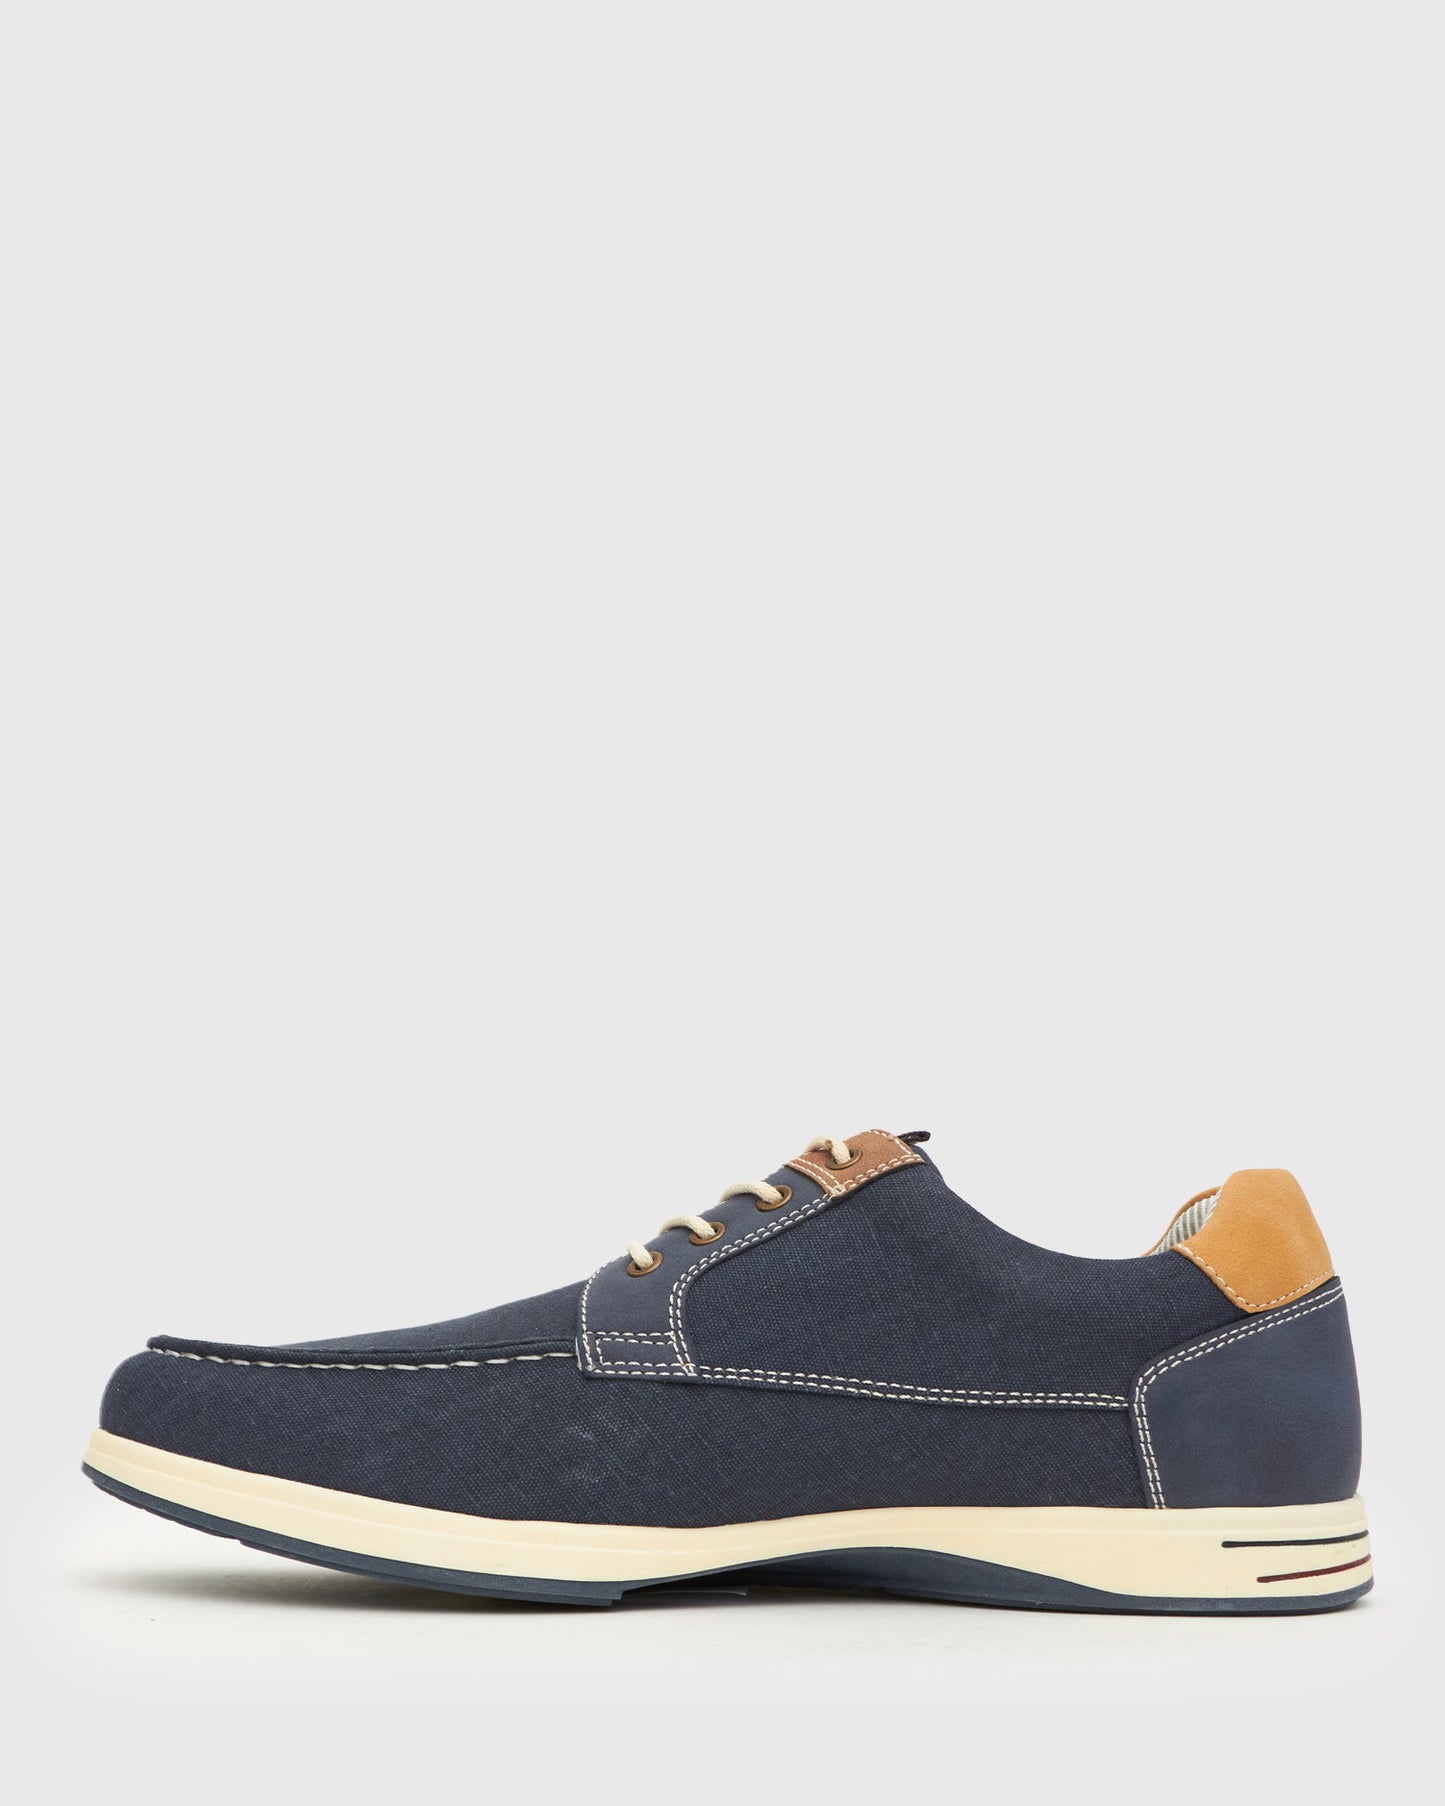 PENCE Canvas Casual Shoes